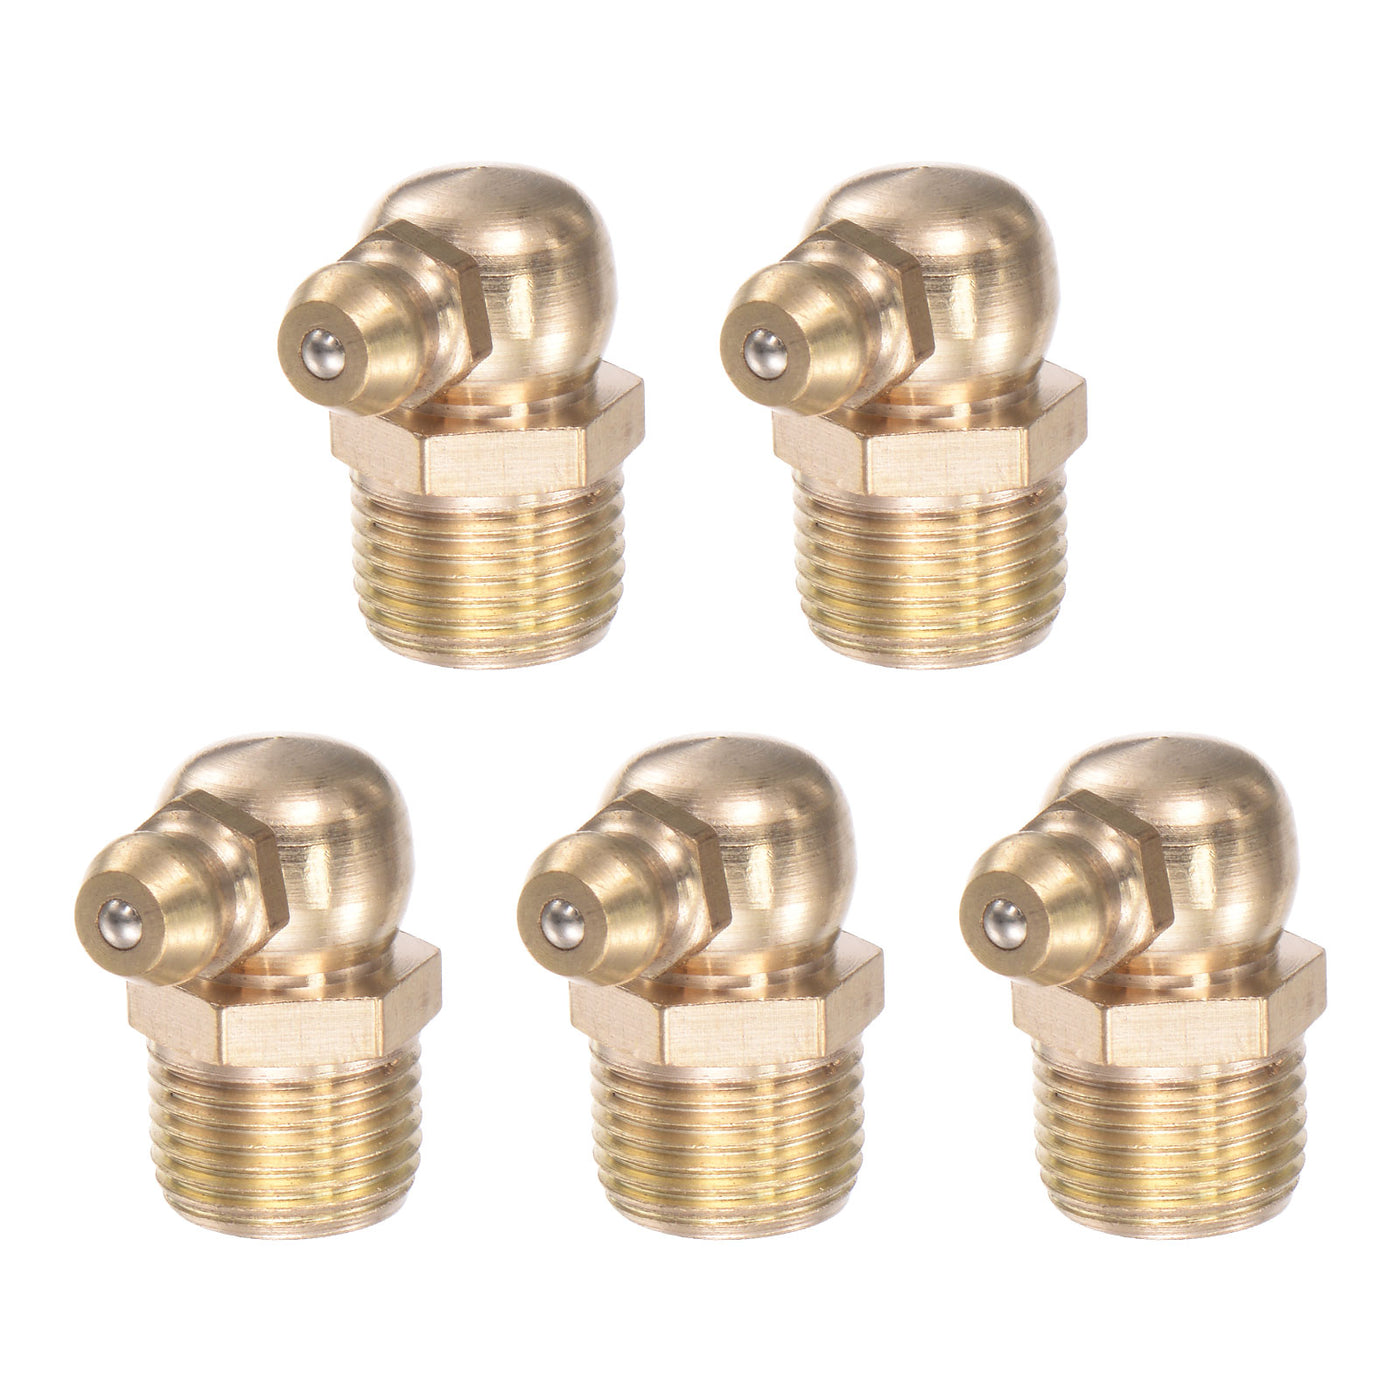 Uxcell Uxcell Brass 90 Degree Hydraulic Grease Fitting M6 x 1mm Thread, 5Pcs